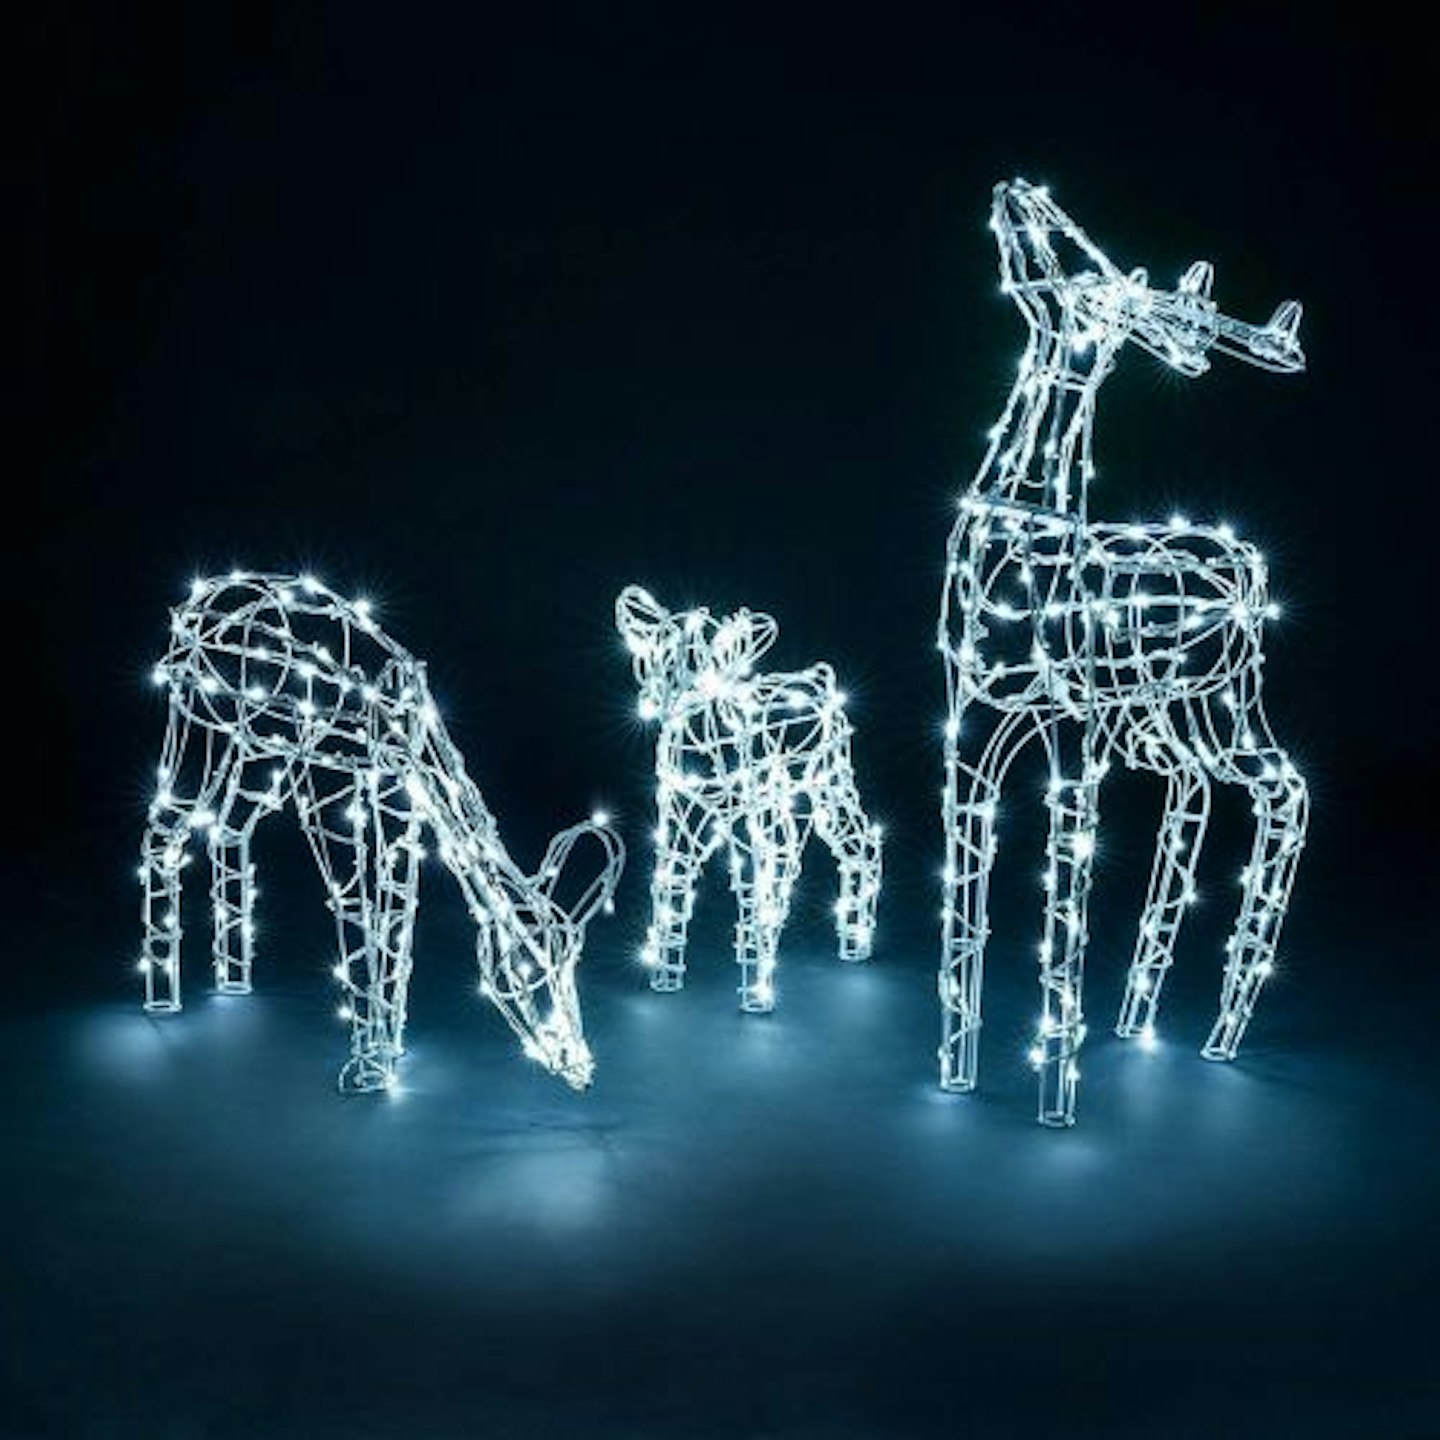 Christow Christmas Reindeer Family Light Up Outdoor Decoration, Energy Efficient LED White Wire Flashing Garden Silhouette, Mains Powered (Large 3 piece set)